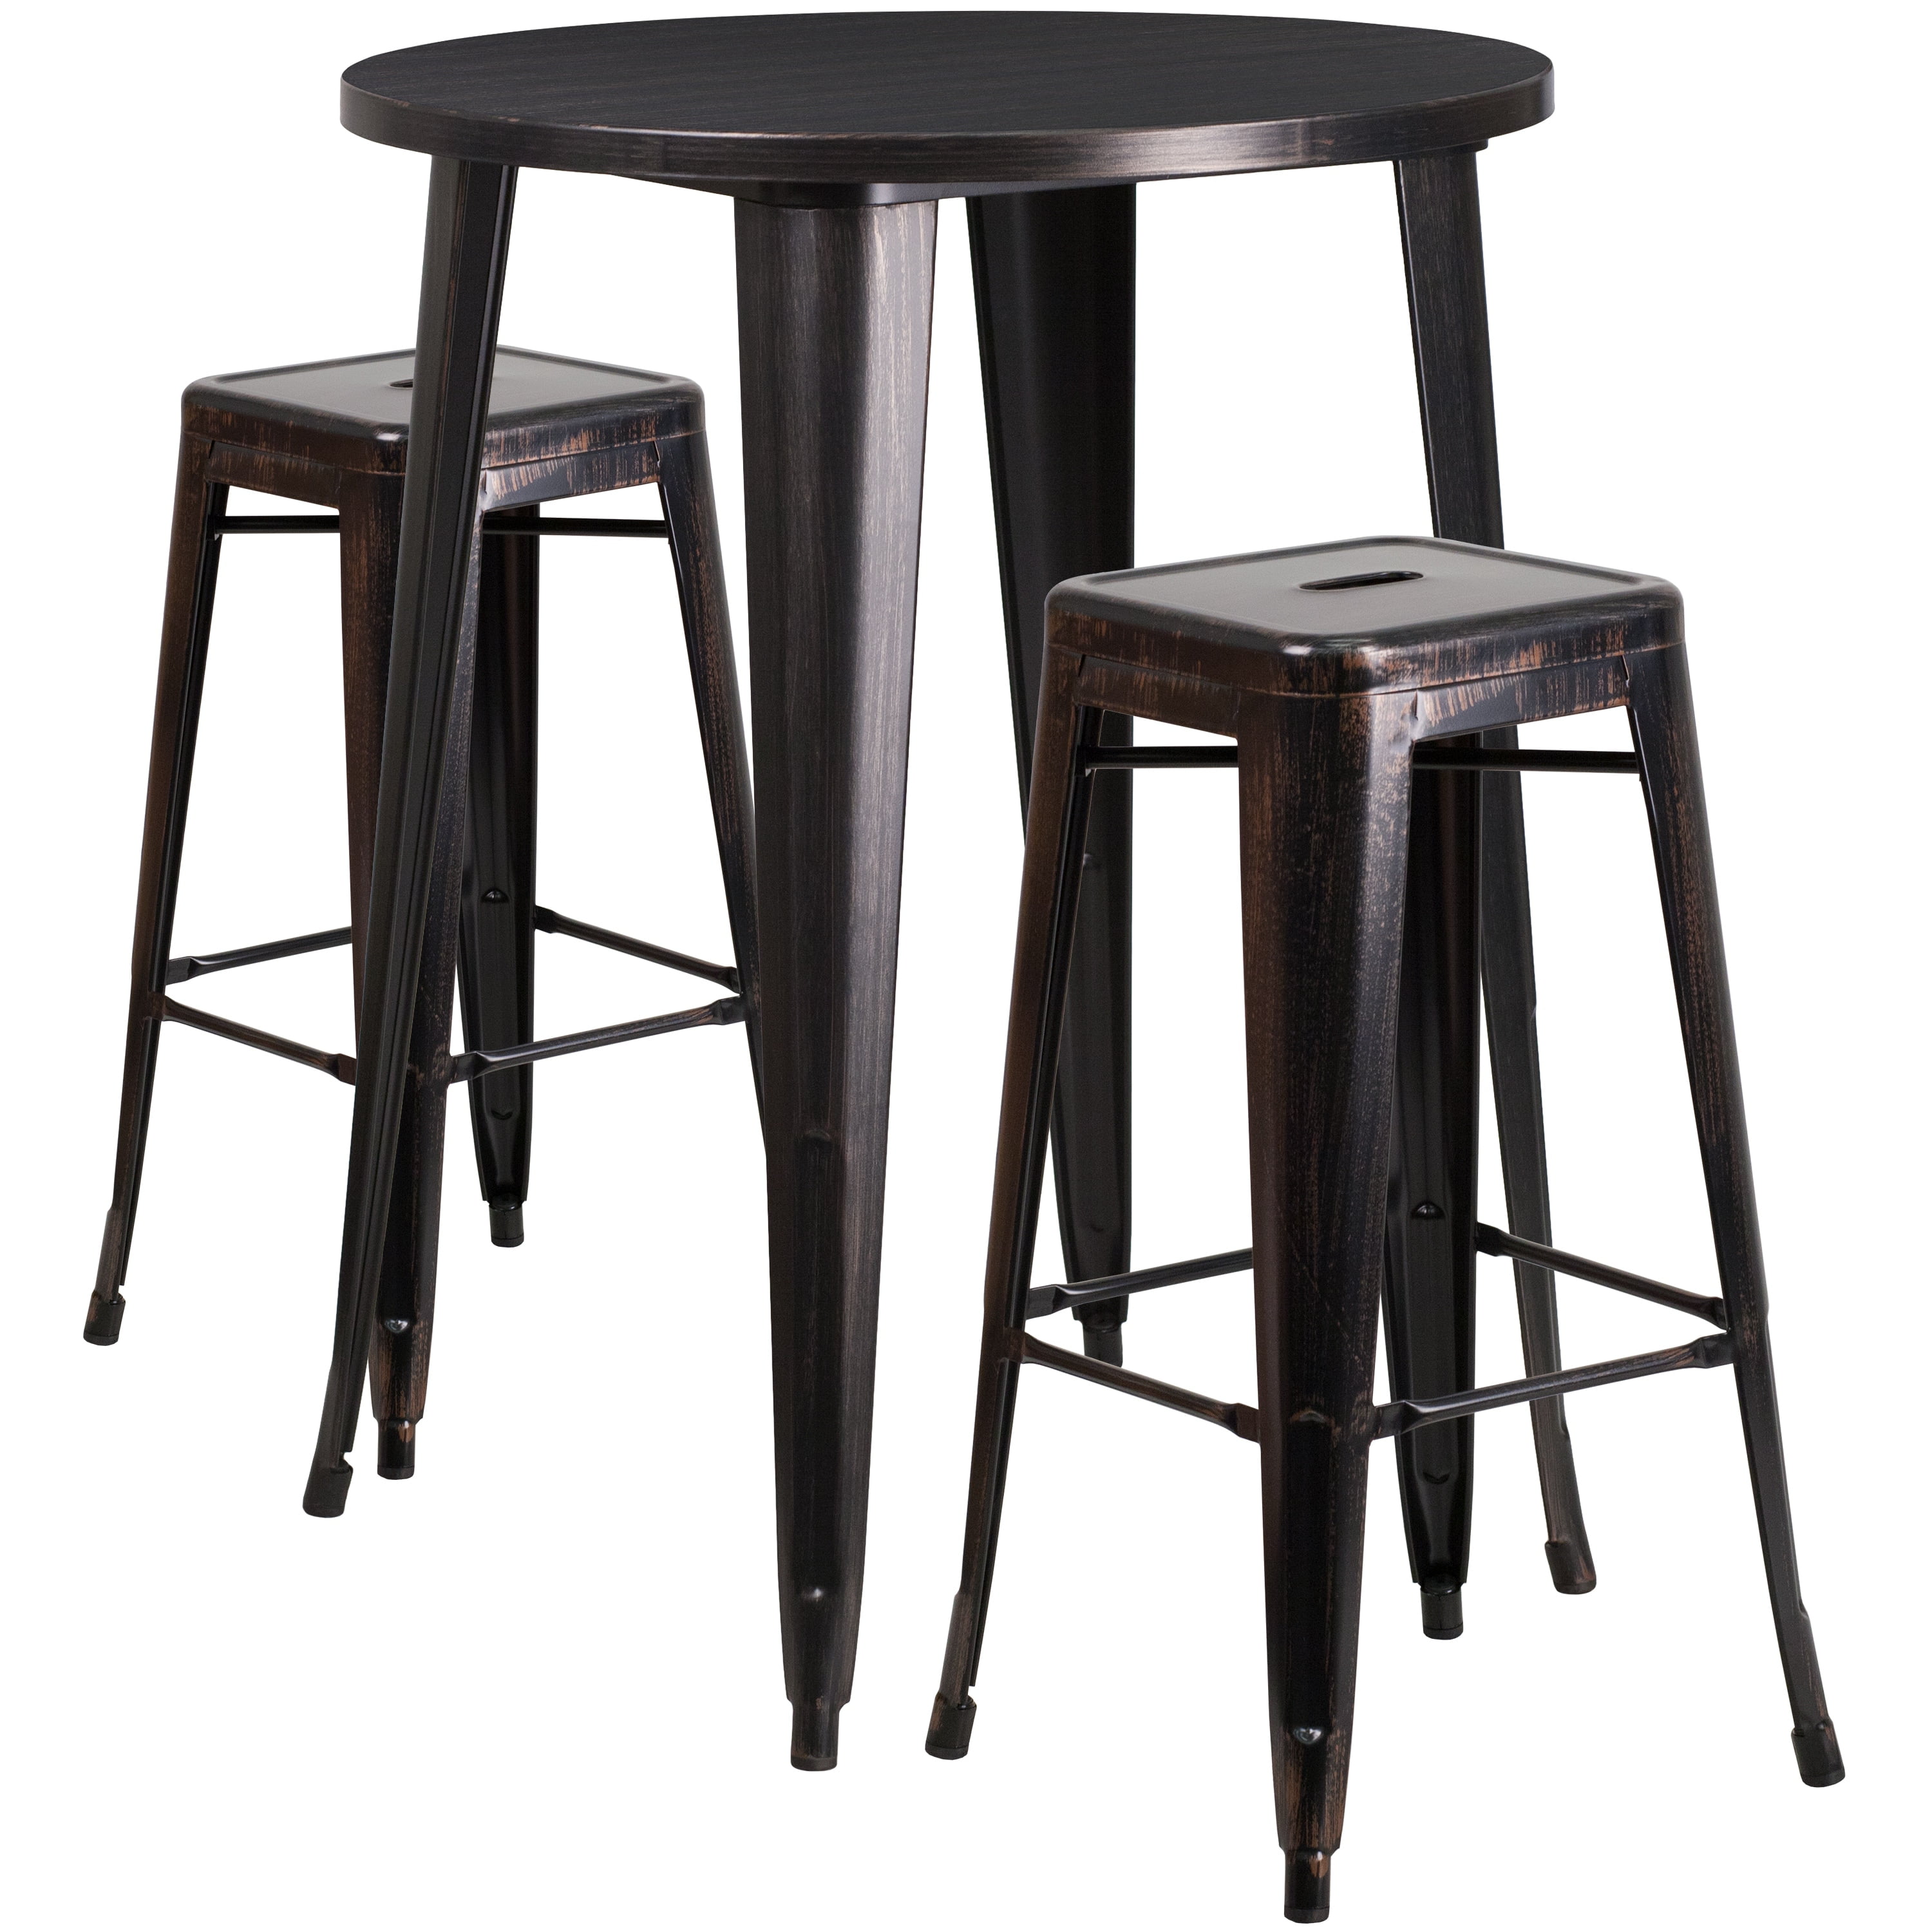 Lancaster Home 30 Round Metal Indoor-Outdoor Bar Table Set with 4 Square Seat Backless Stools Black 